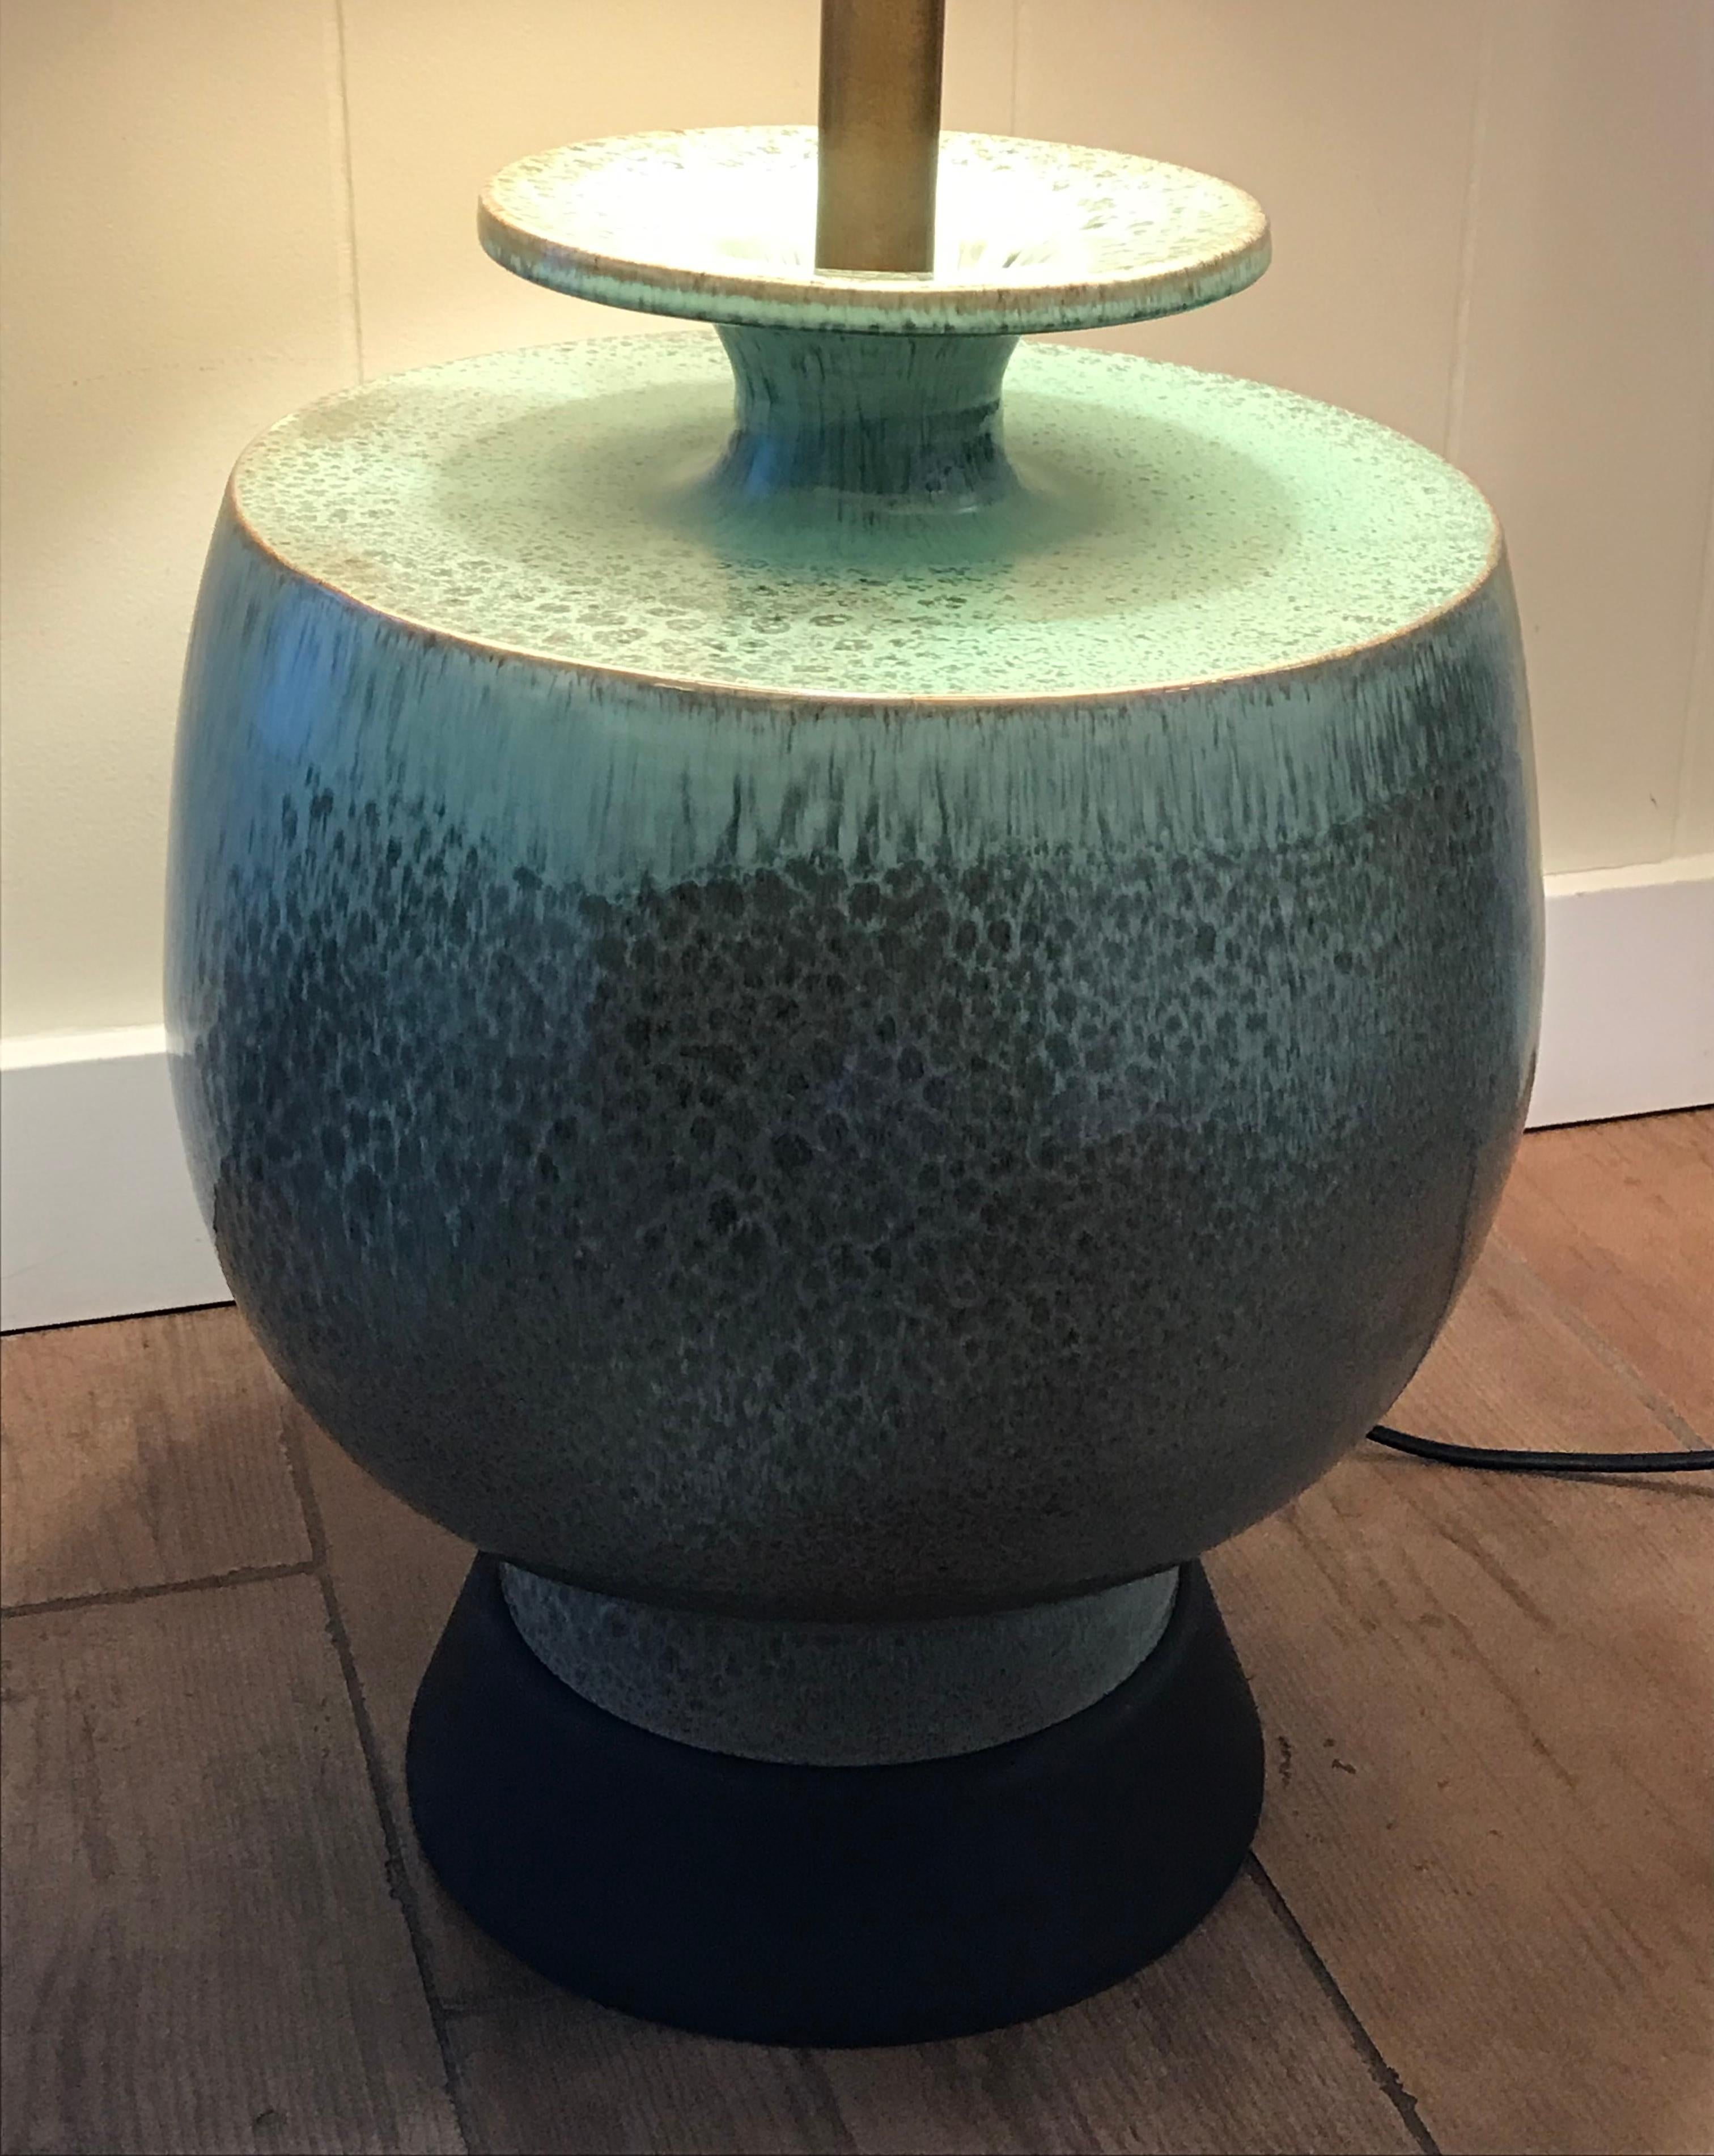 Stunning ceramic table lamp by Marbro Lamp Co. The beautiful turquoise glazed ceramic base is Italian and marked on the bottom, professionally rewired with three way socket, original lamp shade included.